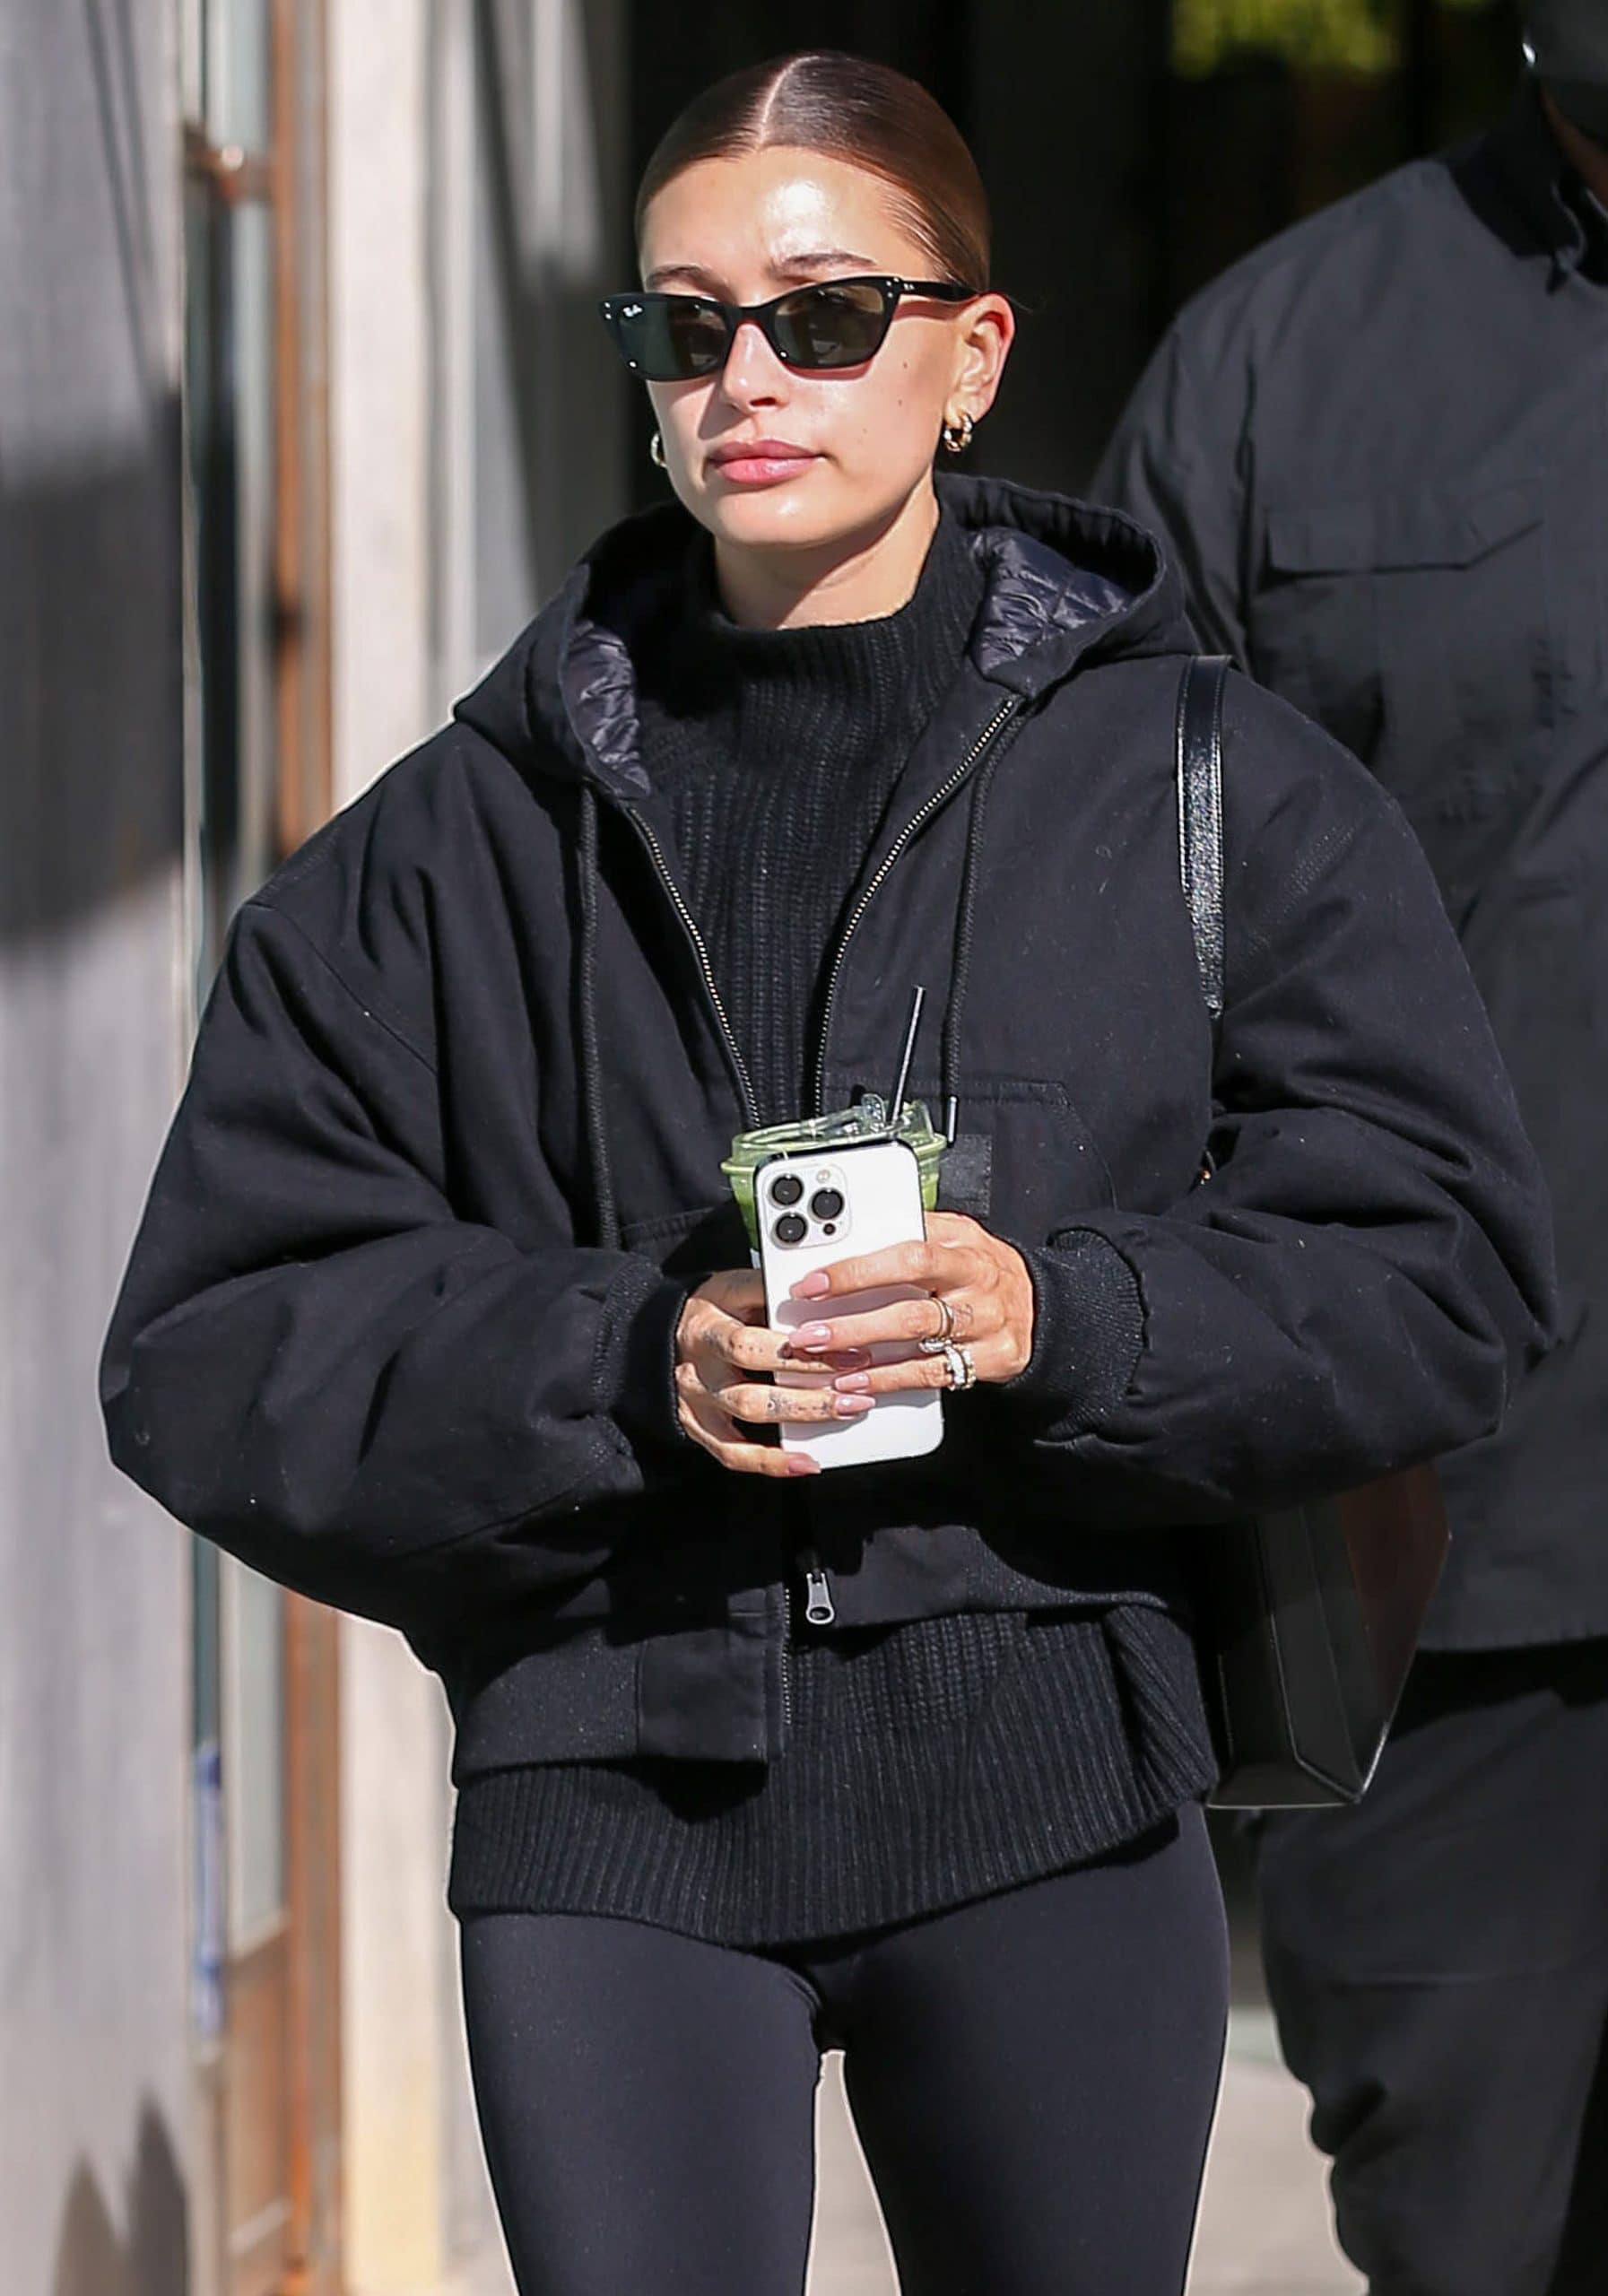 Hailey Bieber wears her signature center-parted tight bun with minimal makeup and RayBan angular sunglasses